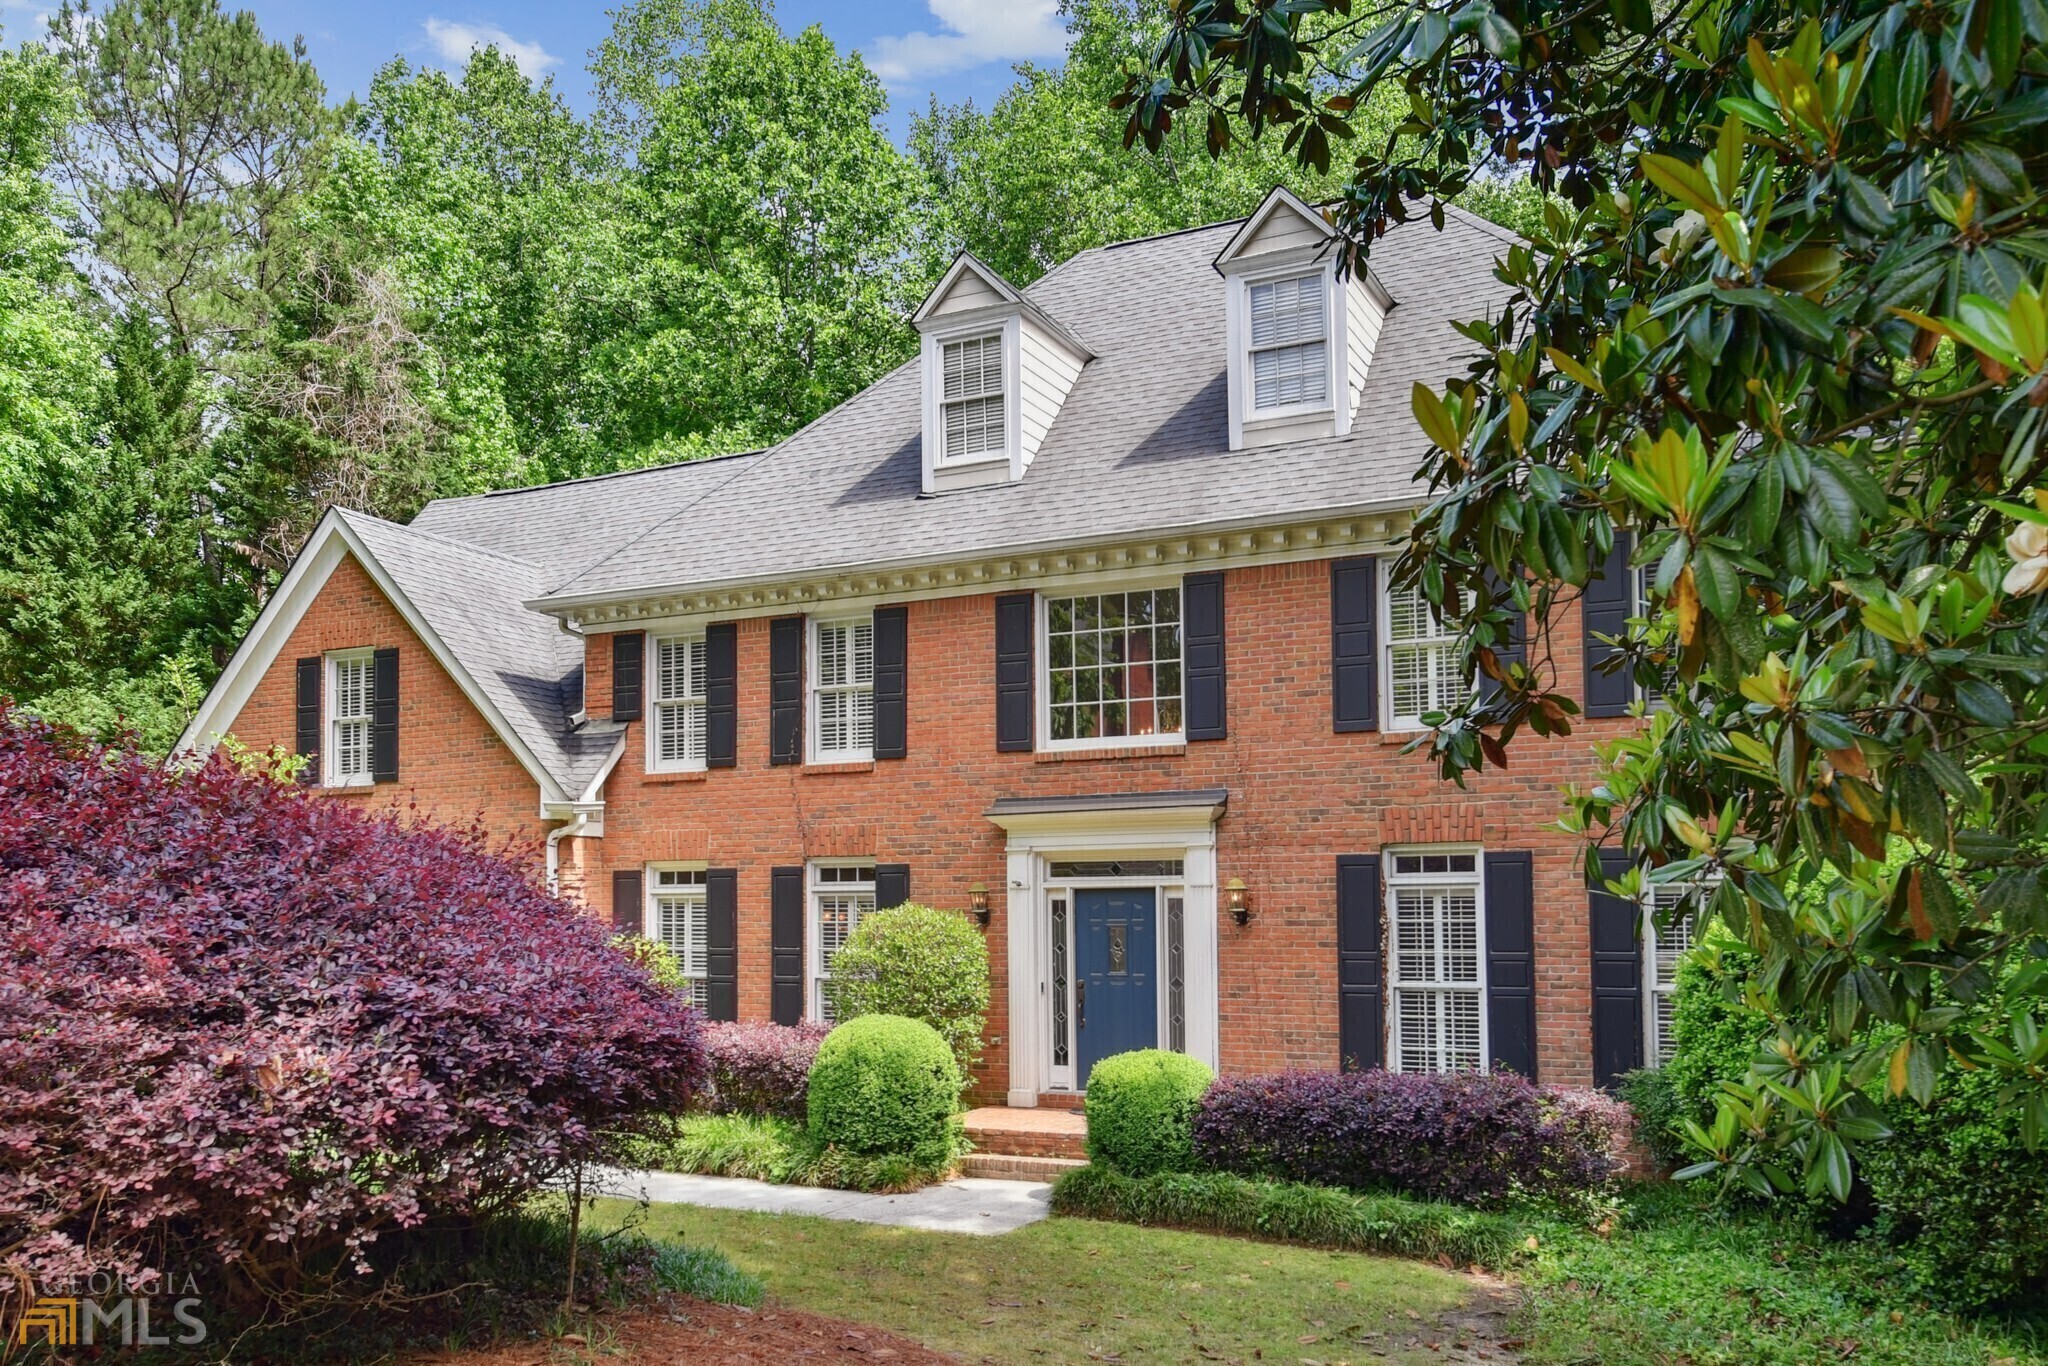 5 Bedroom, 3.5 Bath, Brick Home In The Coveted Byr